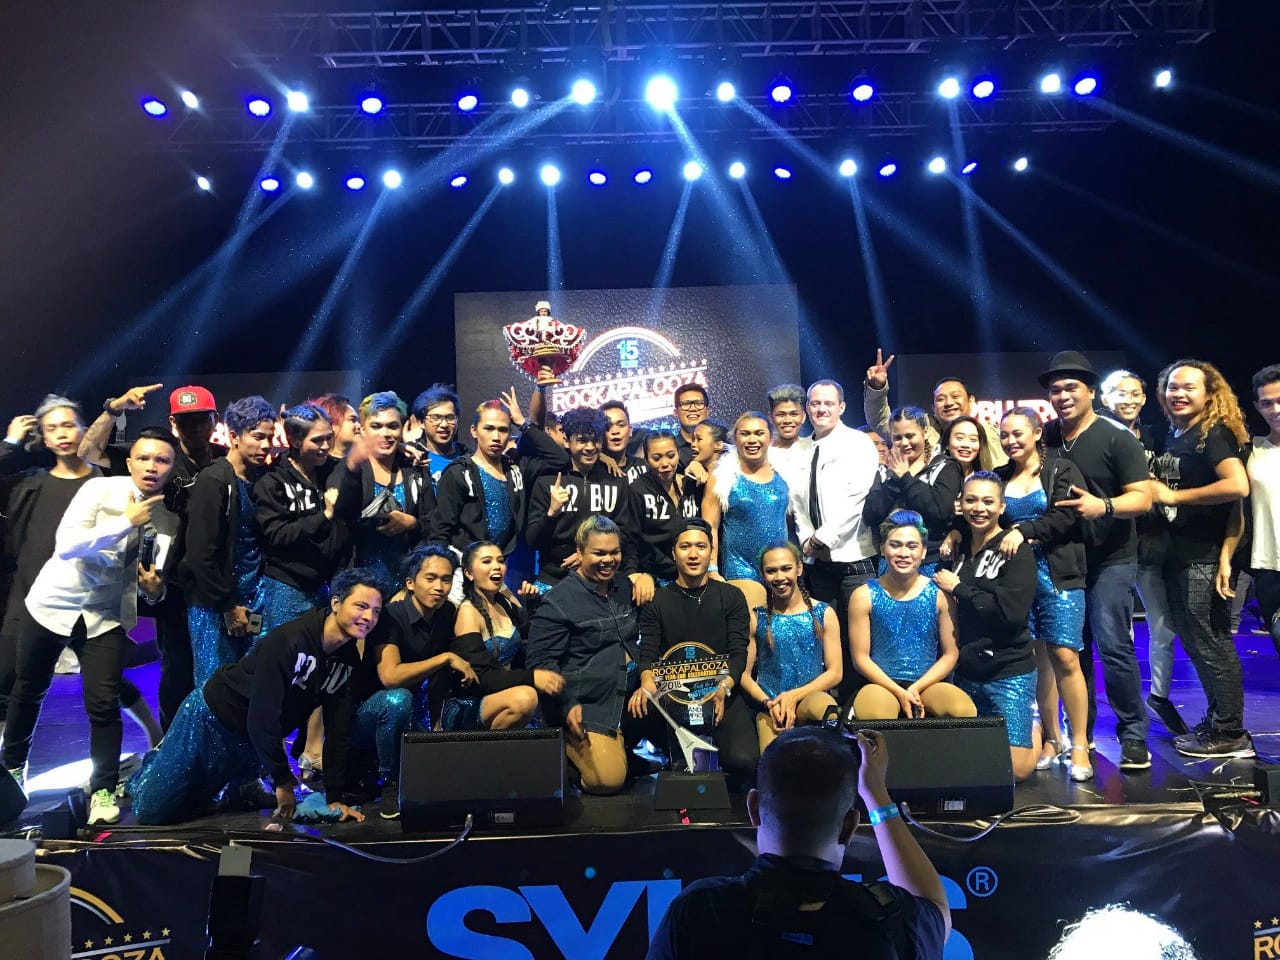 SYKES holds epic 2018 yearend event